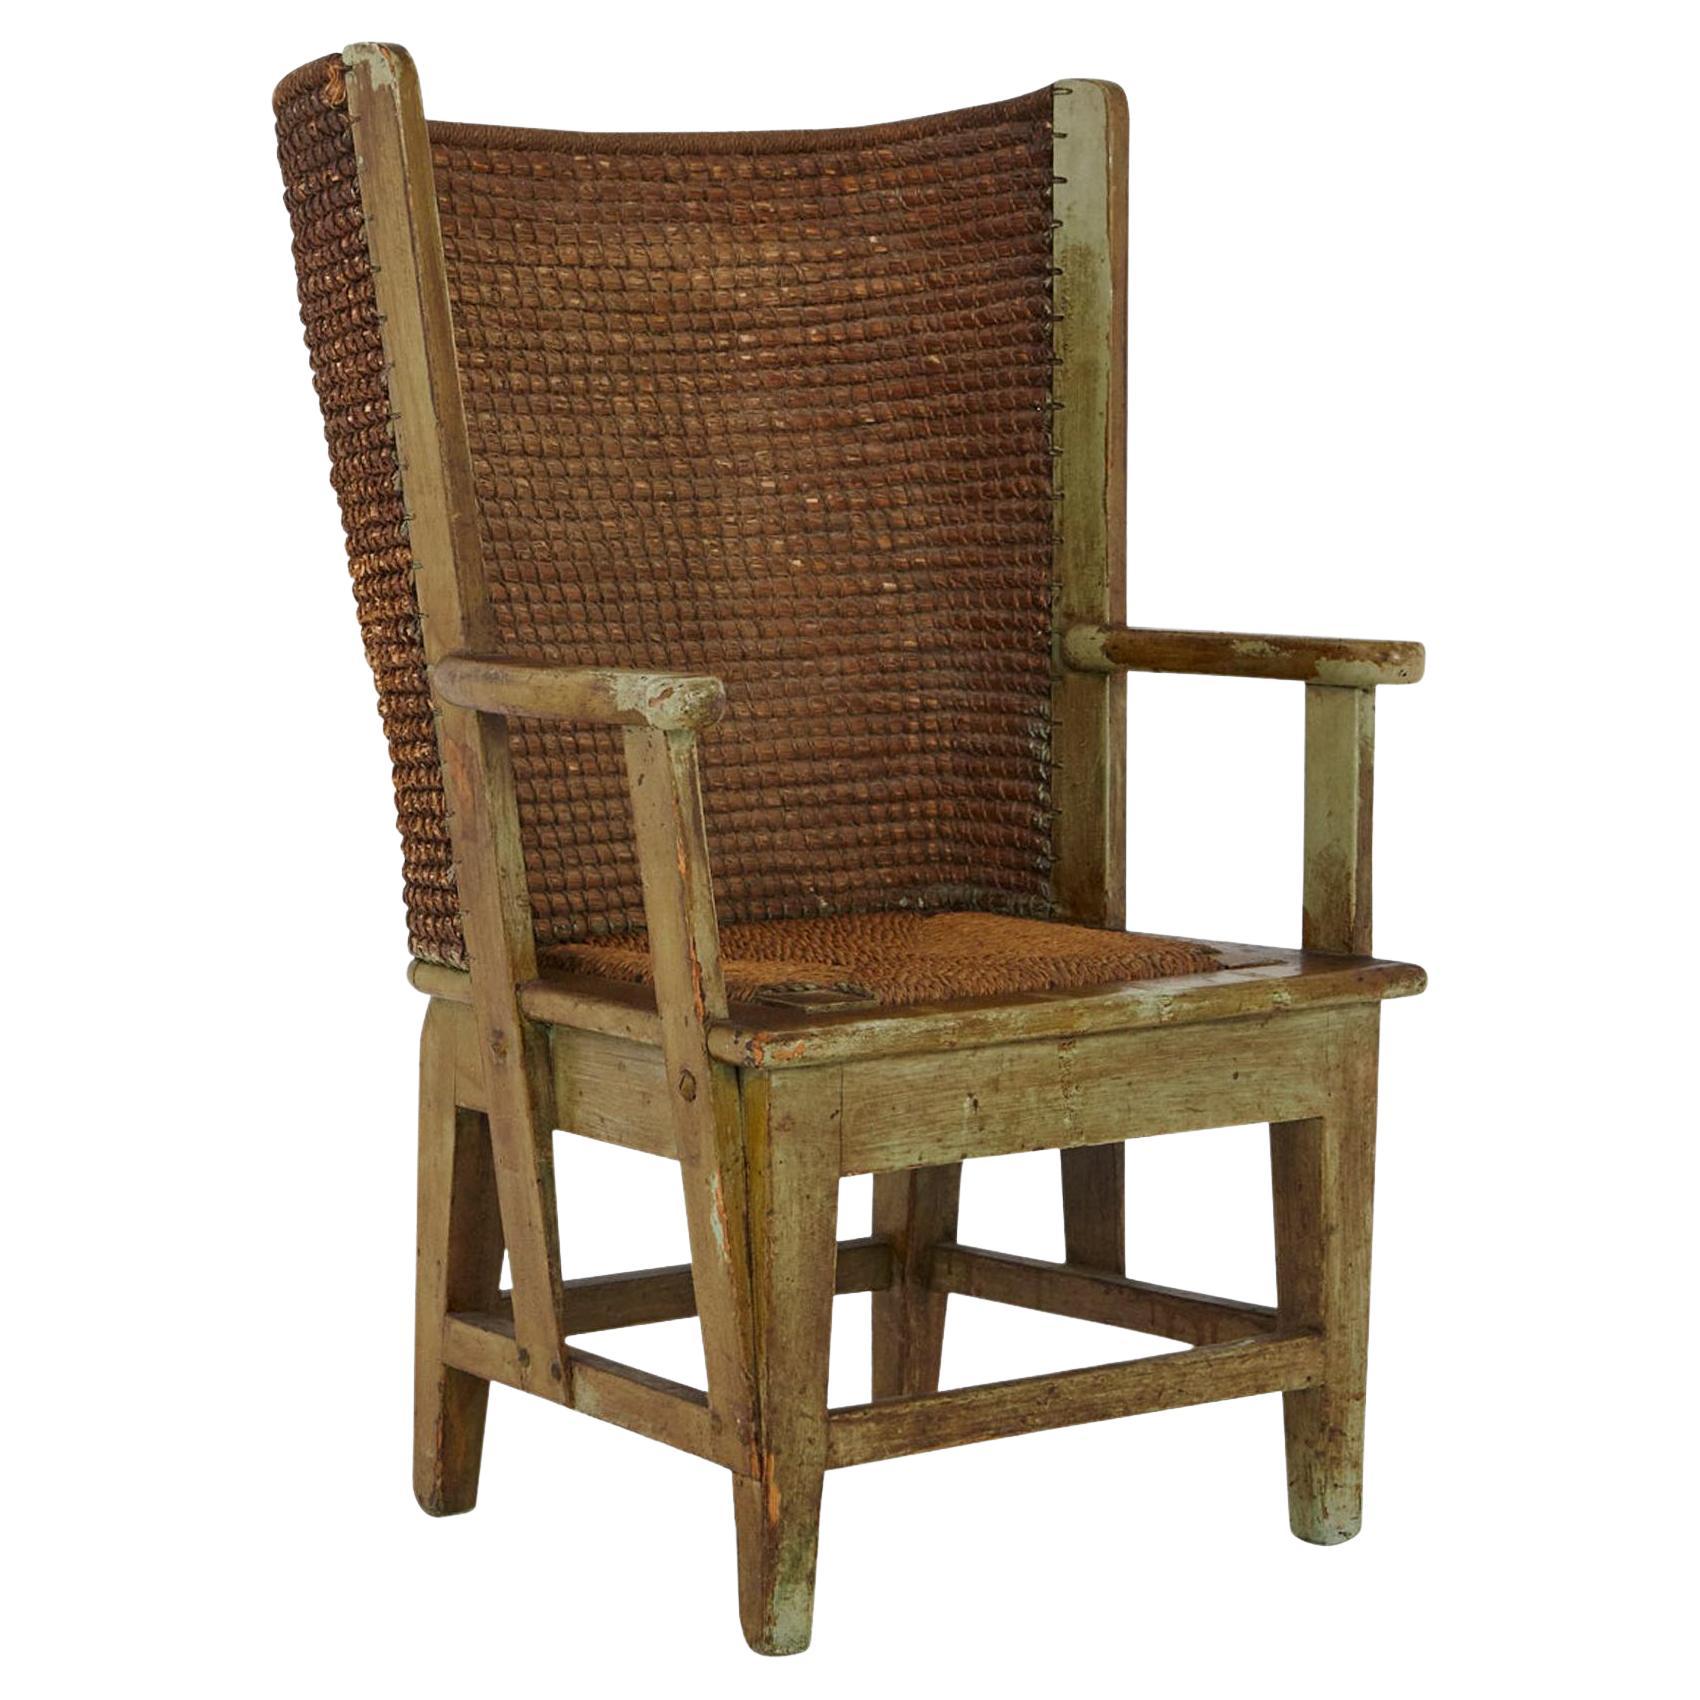 Child's Orkney Chair with Hand Woven Straw Back, Scotland, 19th Century For Sale